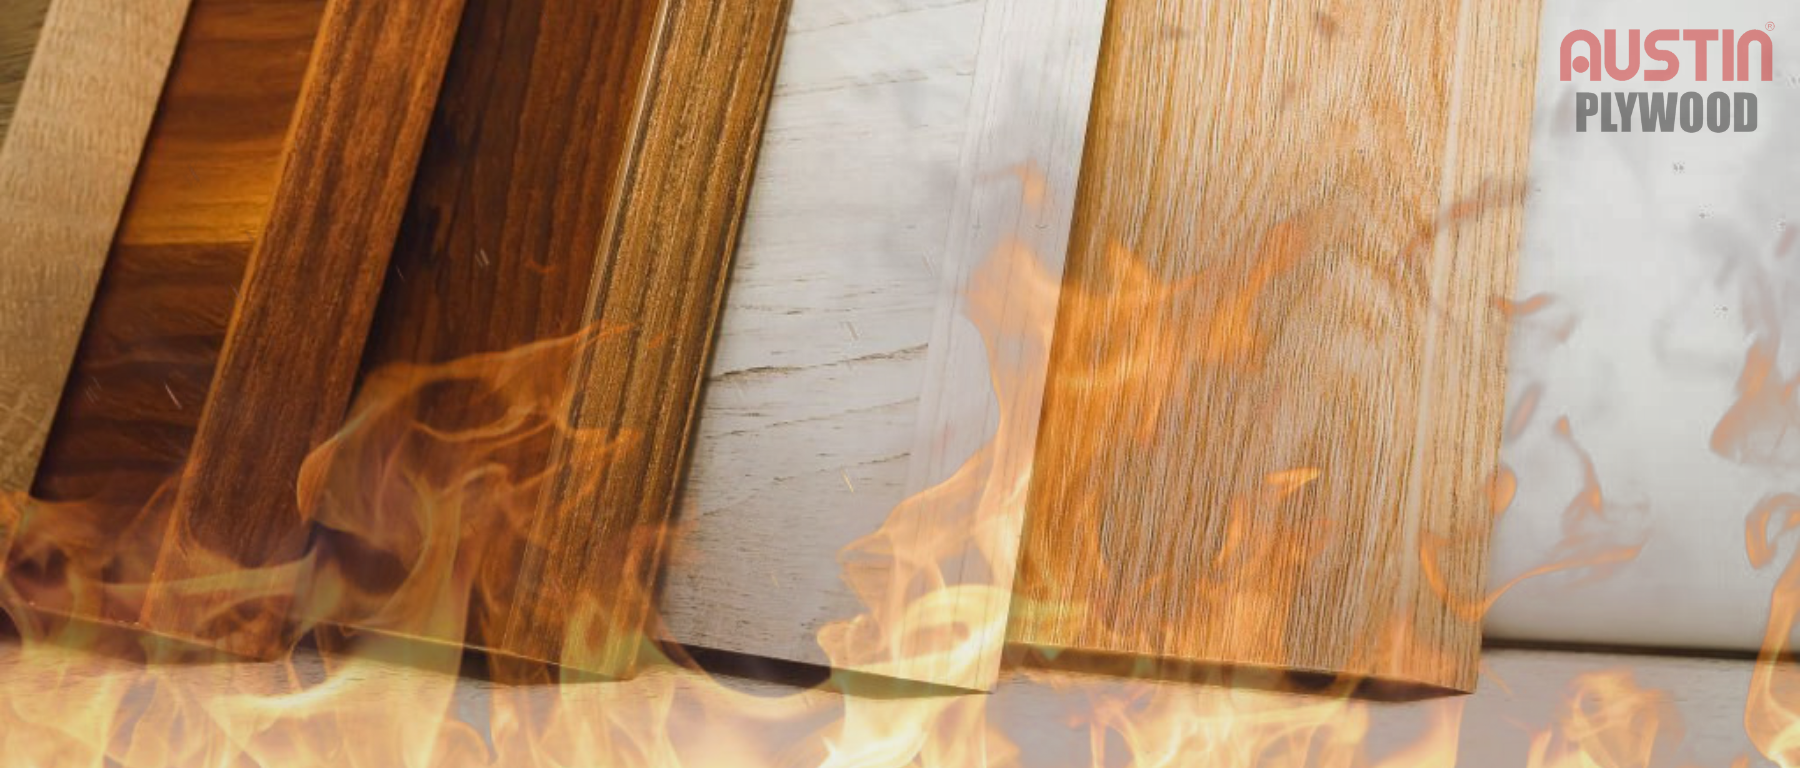 4 Compelling Reasons To Invest In Fire Retardant Plywood